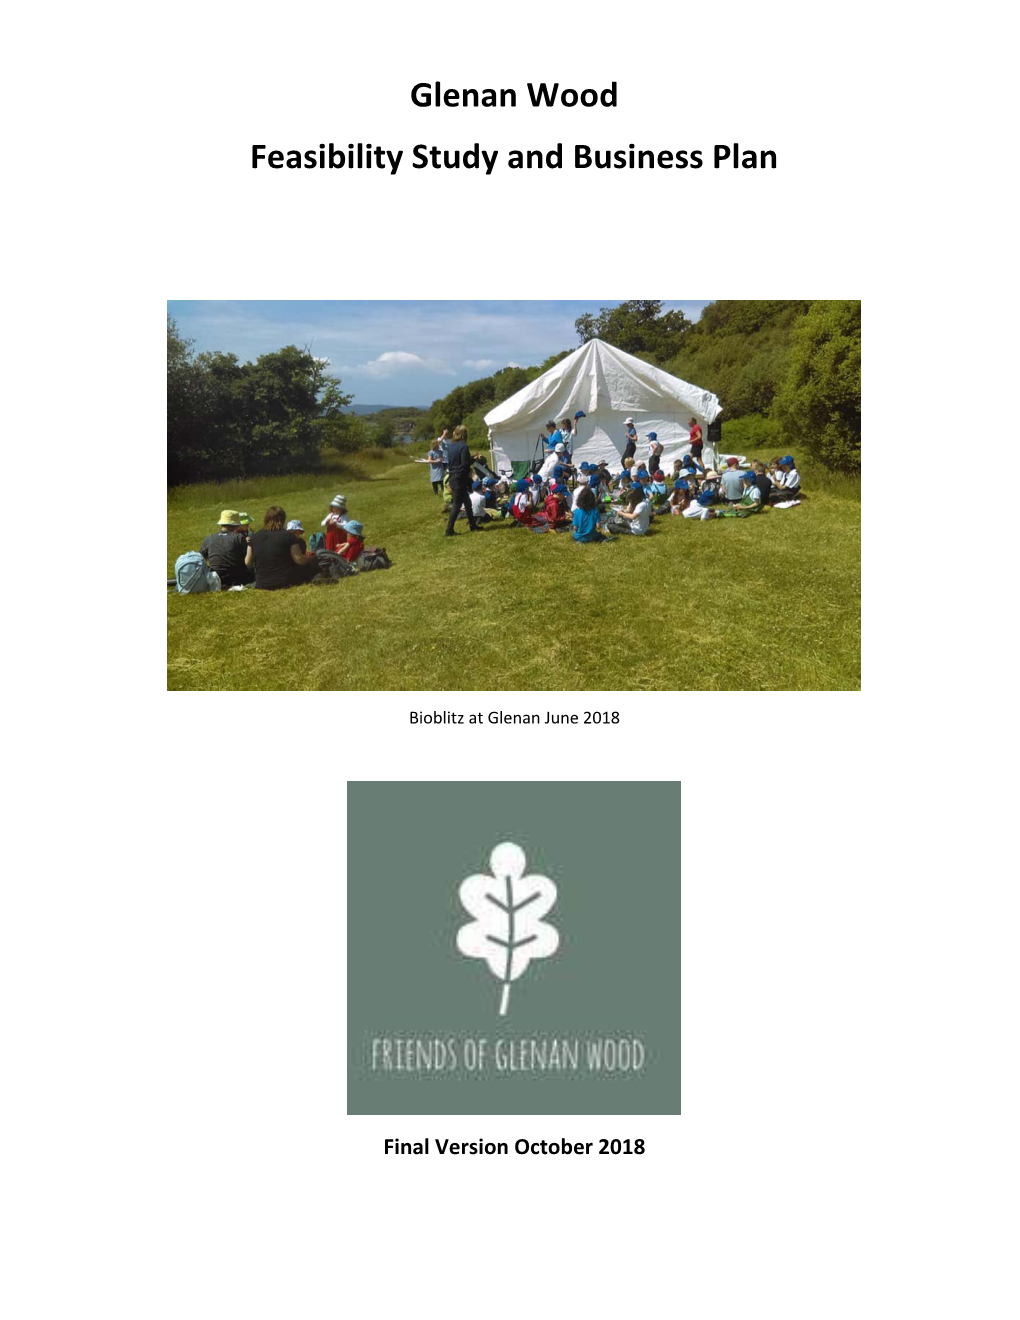 Glenan Wood Feasibility Study and Business Plan